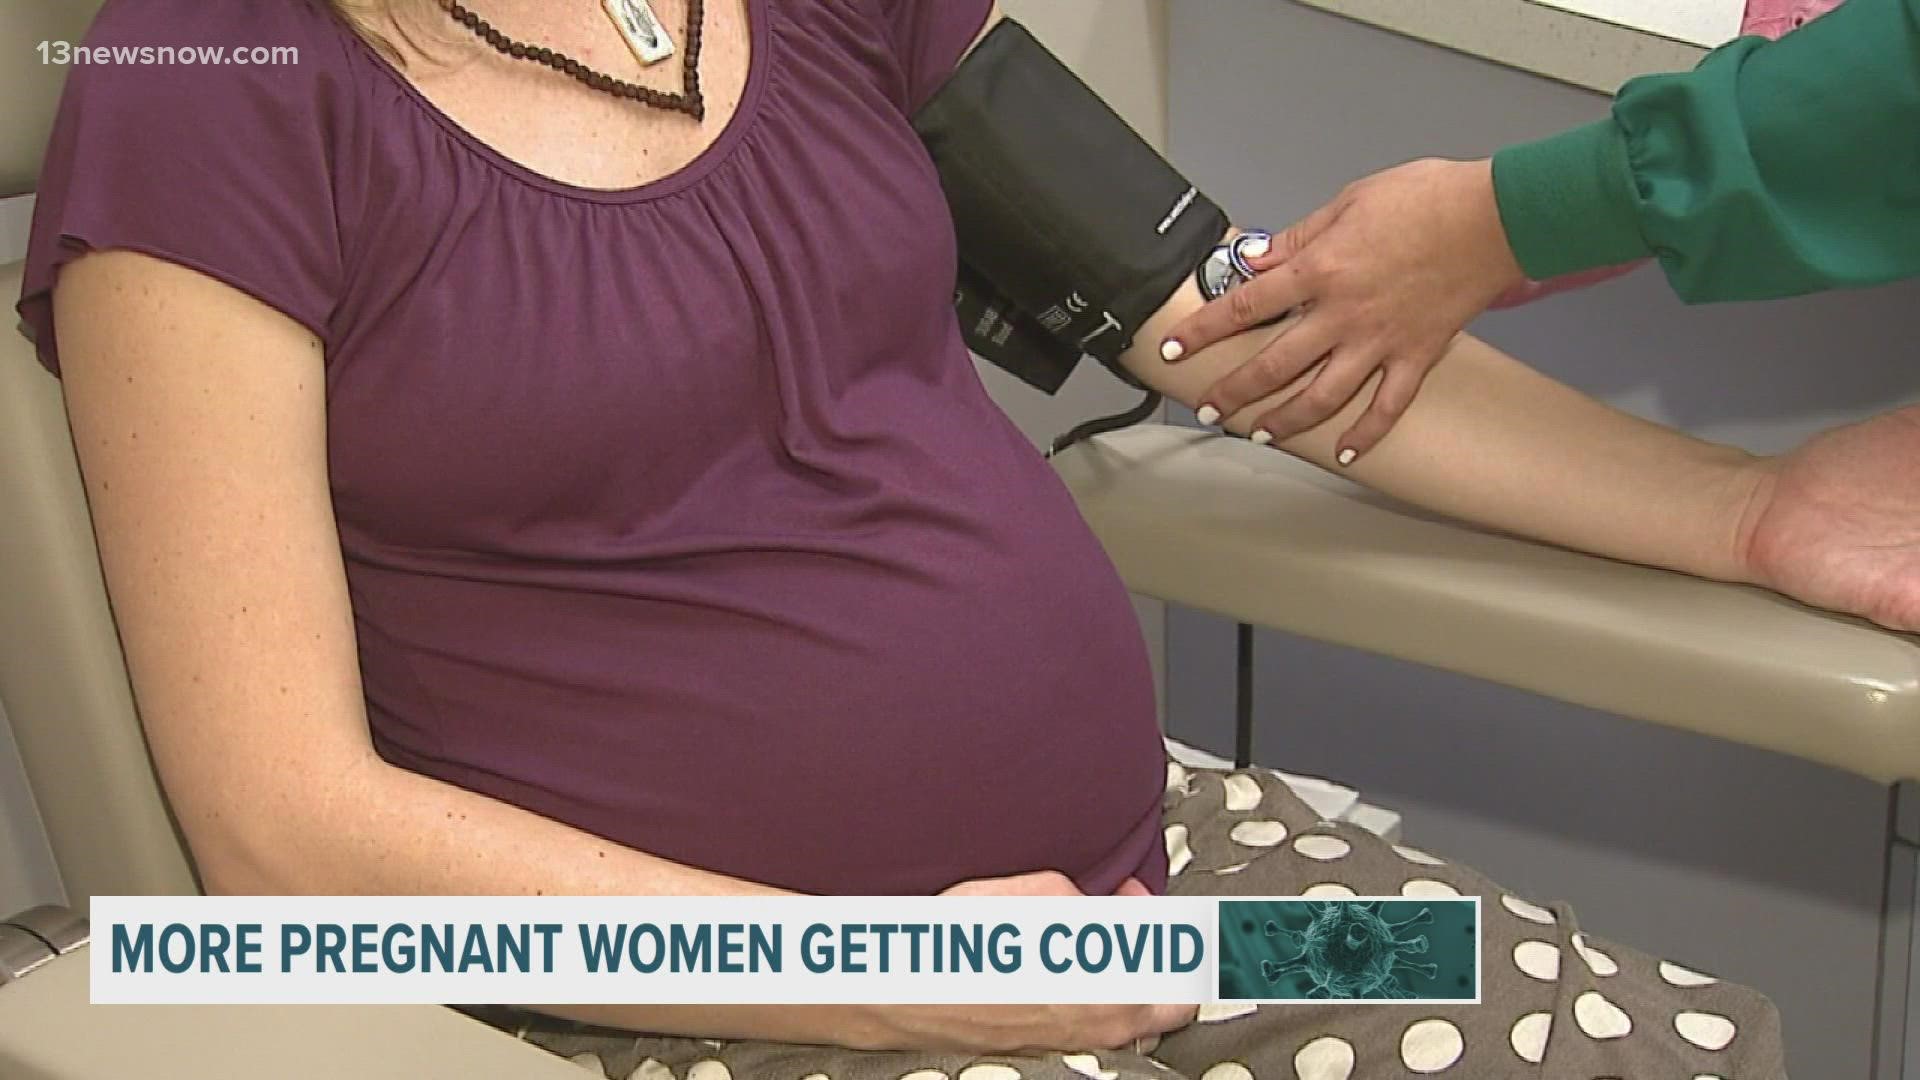 Sentara Norfolk General Hospital says it is seeing more pregnant patients come in with COVID-19 symptoms, and some of them are severe cases.